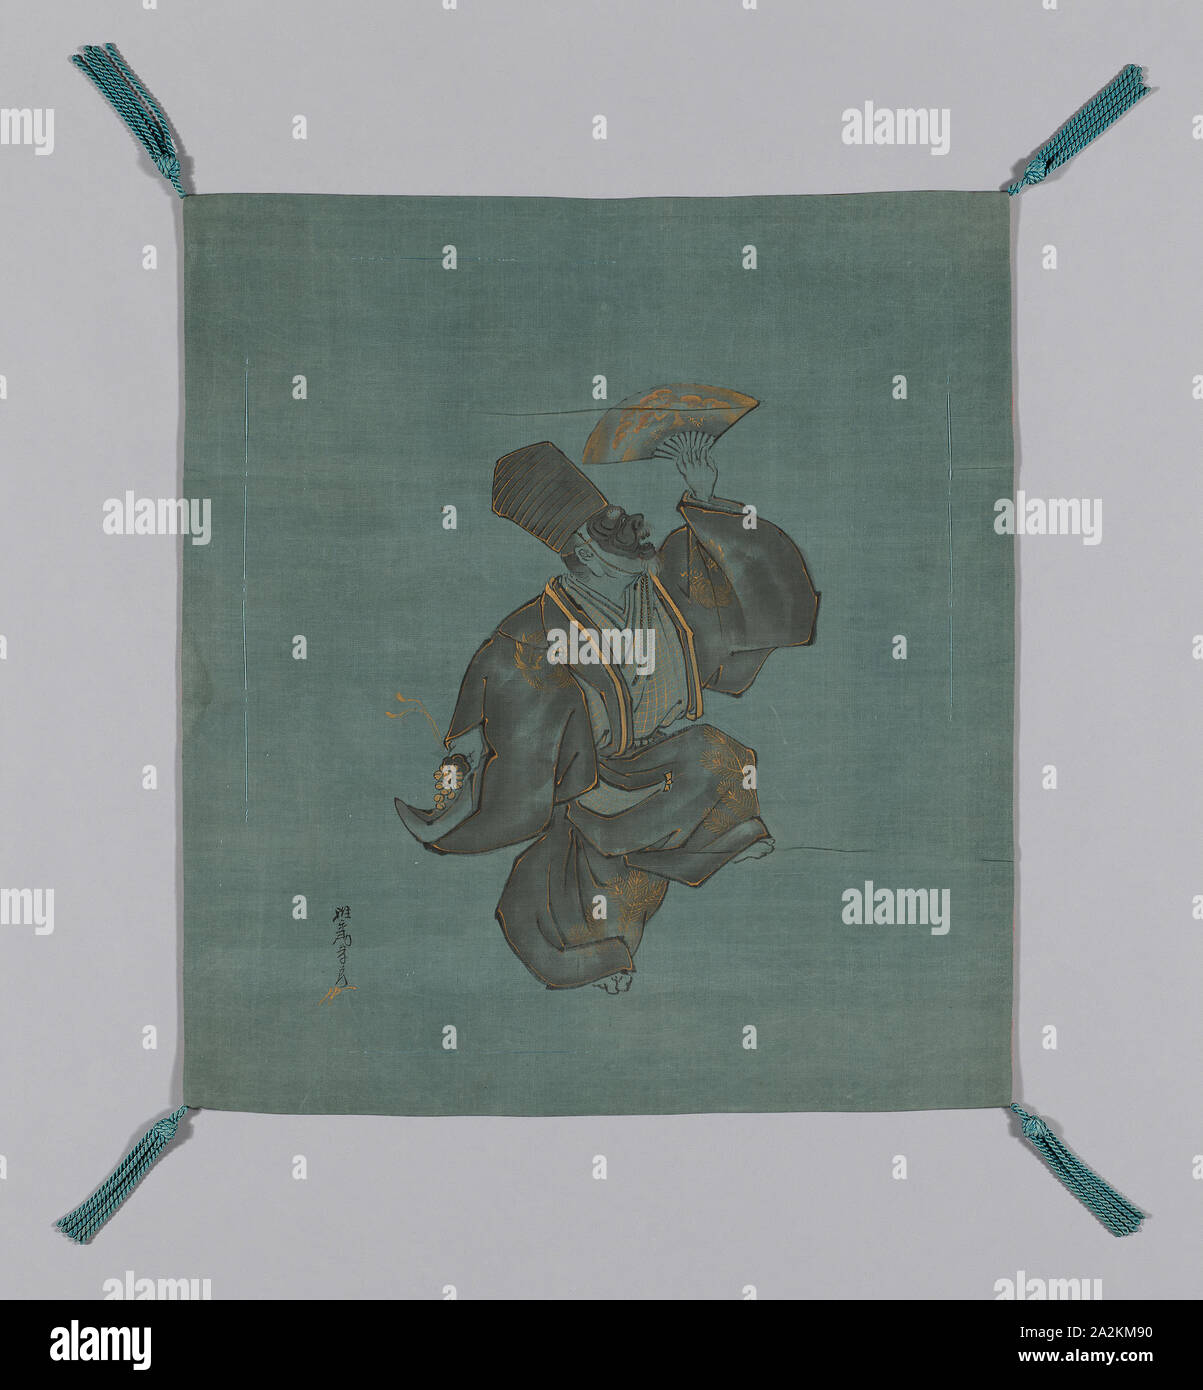 Fukusa (Gift Cover), late Edo period (1789–1868), early 19th century, Painted by Saeki Ganryô (Japanese, active c. 1901/25), Japan, Patterned side: silk, warp-faced, weft-ribbed plain weave (shioze), painted with India ink (sumi) and gold paint, lining: silk, wrap-faced, weft-ribbed plain weave (shioze), sewn with front and lining matched in size (Tachikire awrase), silk, running 'controlling' stitches along all edges, corners: silk, knotted and re-piled fringe tassels, 61 x 54.8 cm (24 x 21 5/8 in Stock Photo